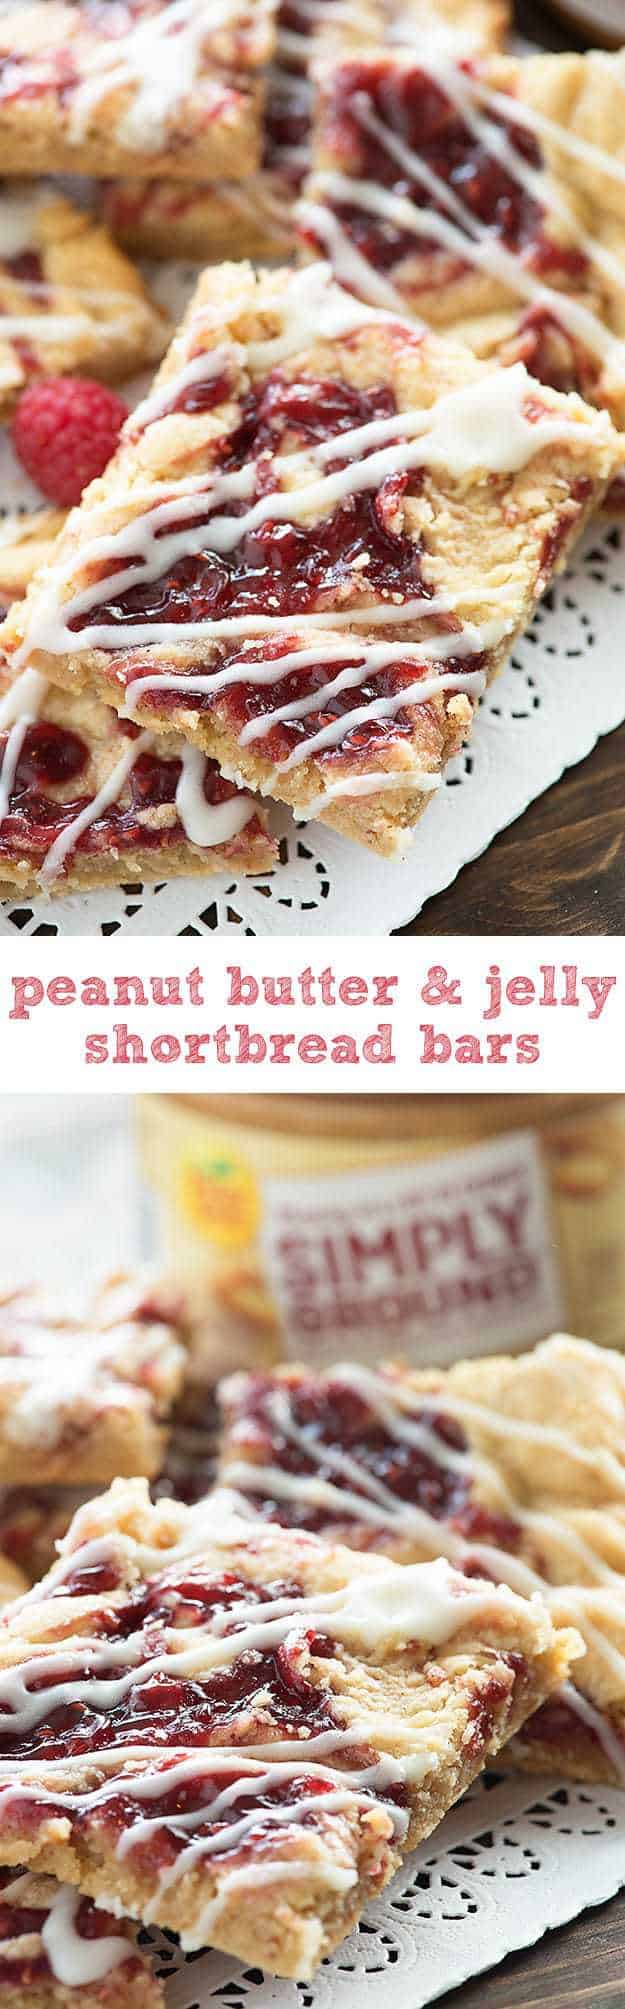 Peanut Butter and Jelly Shortbread Bars! How fun would it be to sneak these in a lunchbox?